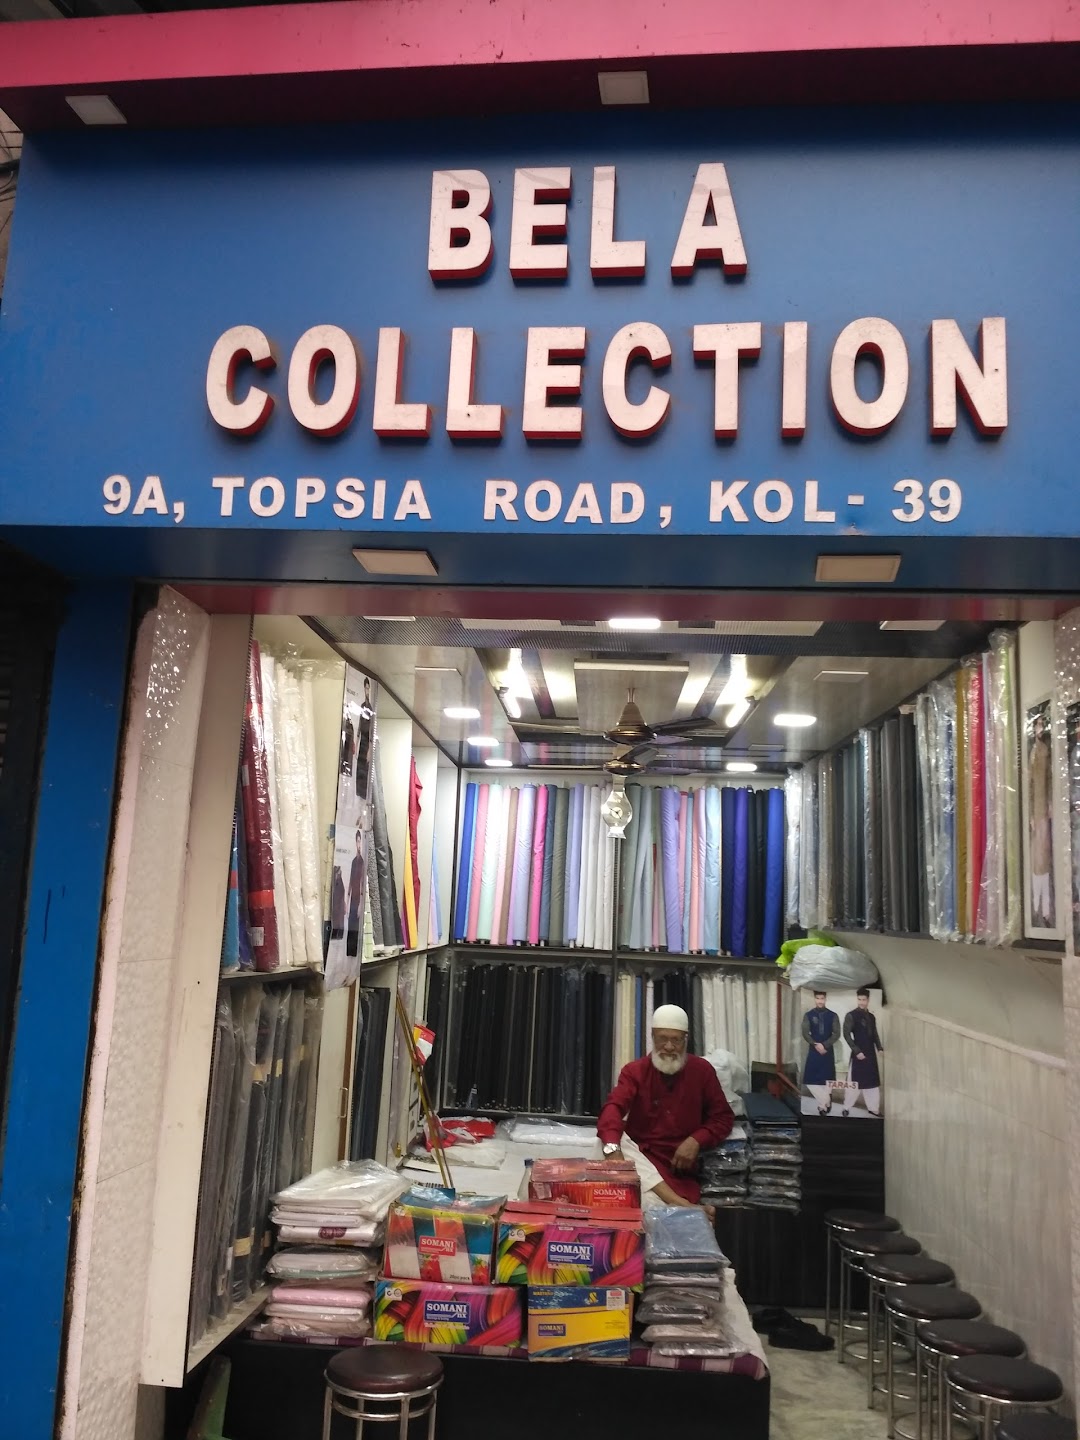 BELA COLLECTION